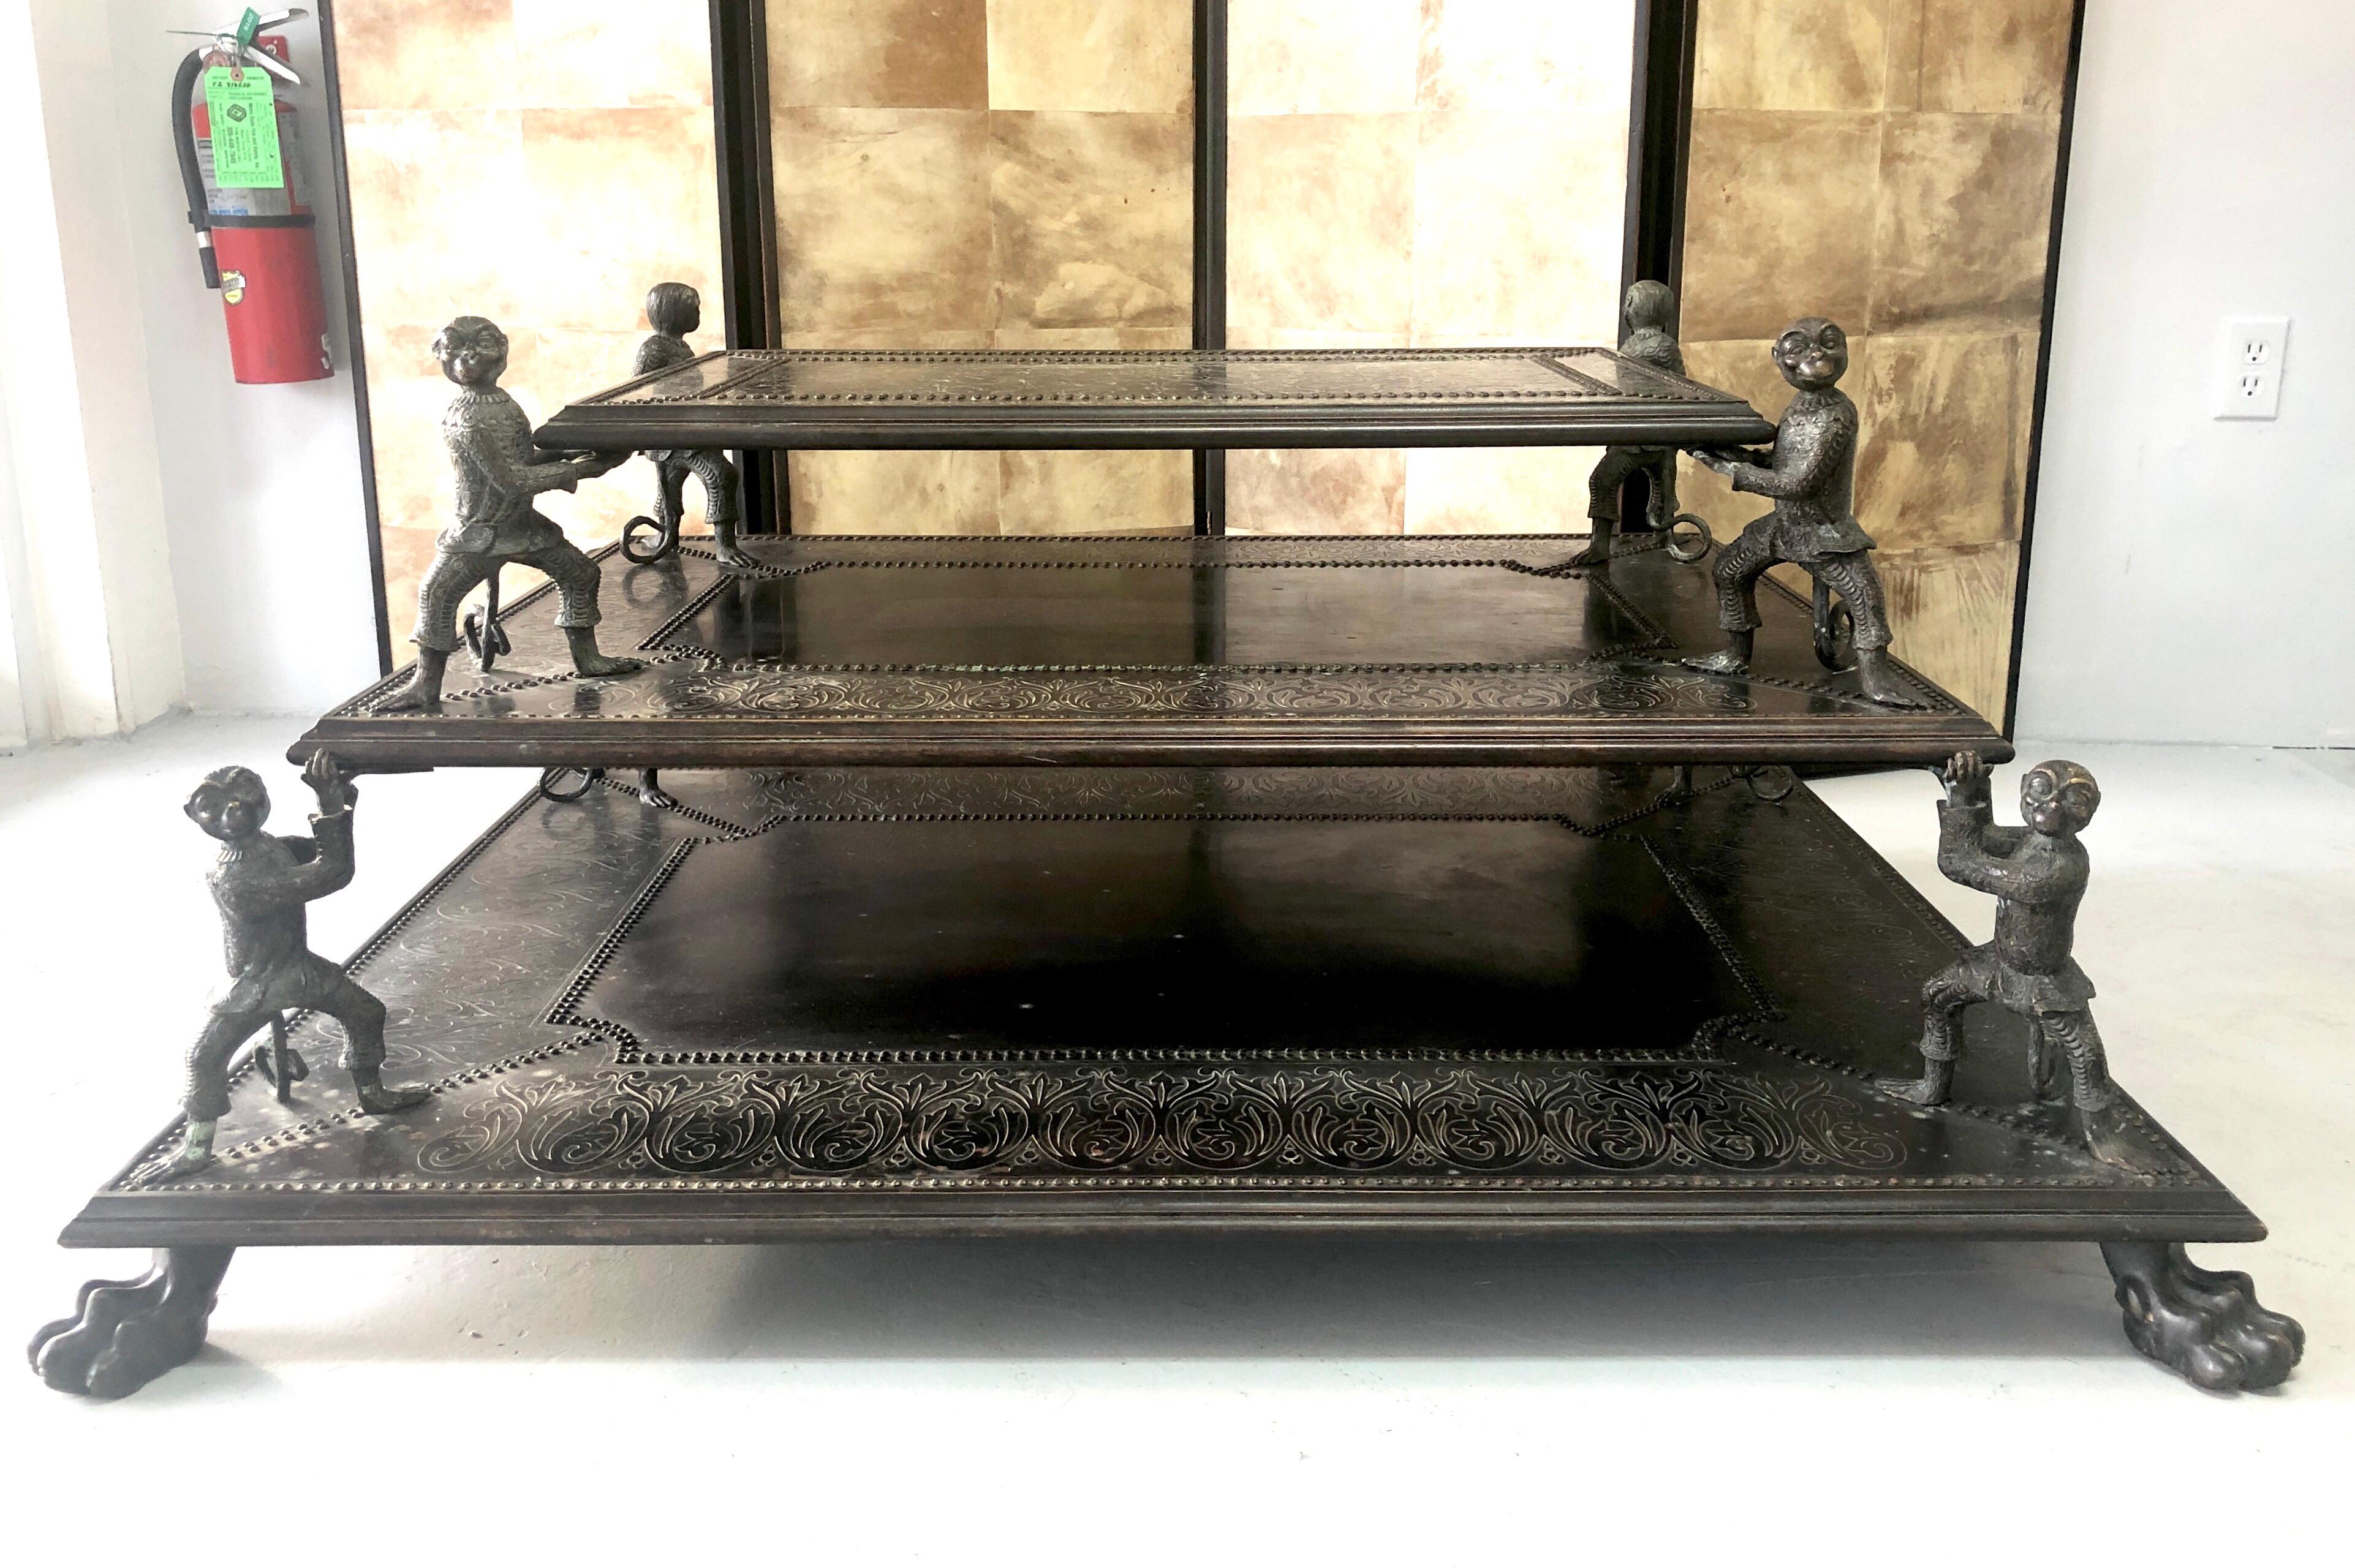 Extraordinary bronze table, 3 tiers, the bottom tier i supported by large hairy paws, the upper 2 levels are held by bronze monkeys with great personalities. The surfaces are embossed bronze with small nail detail.